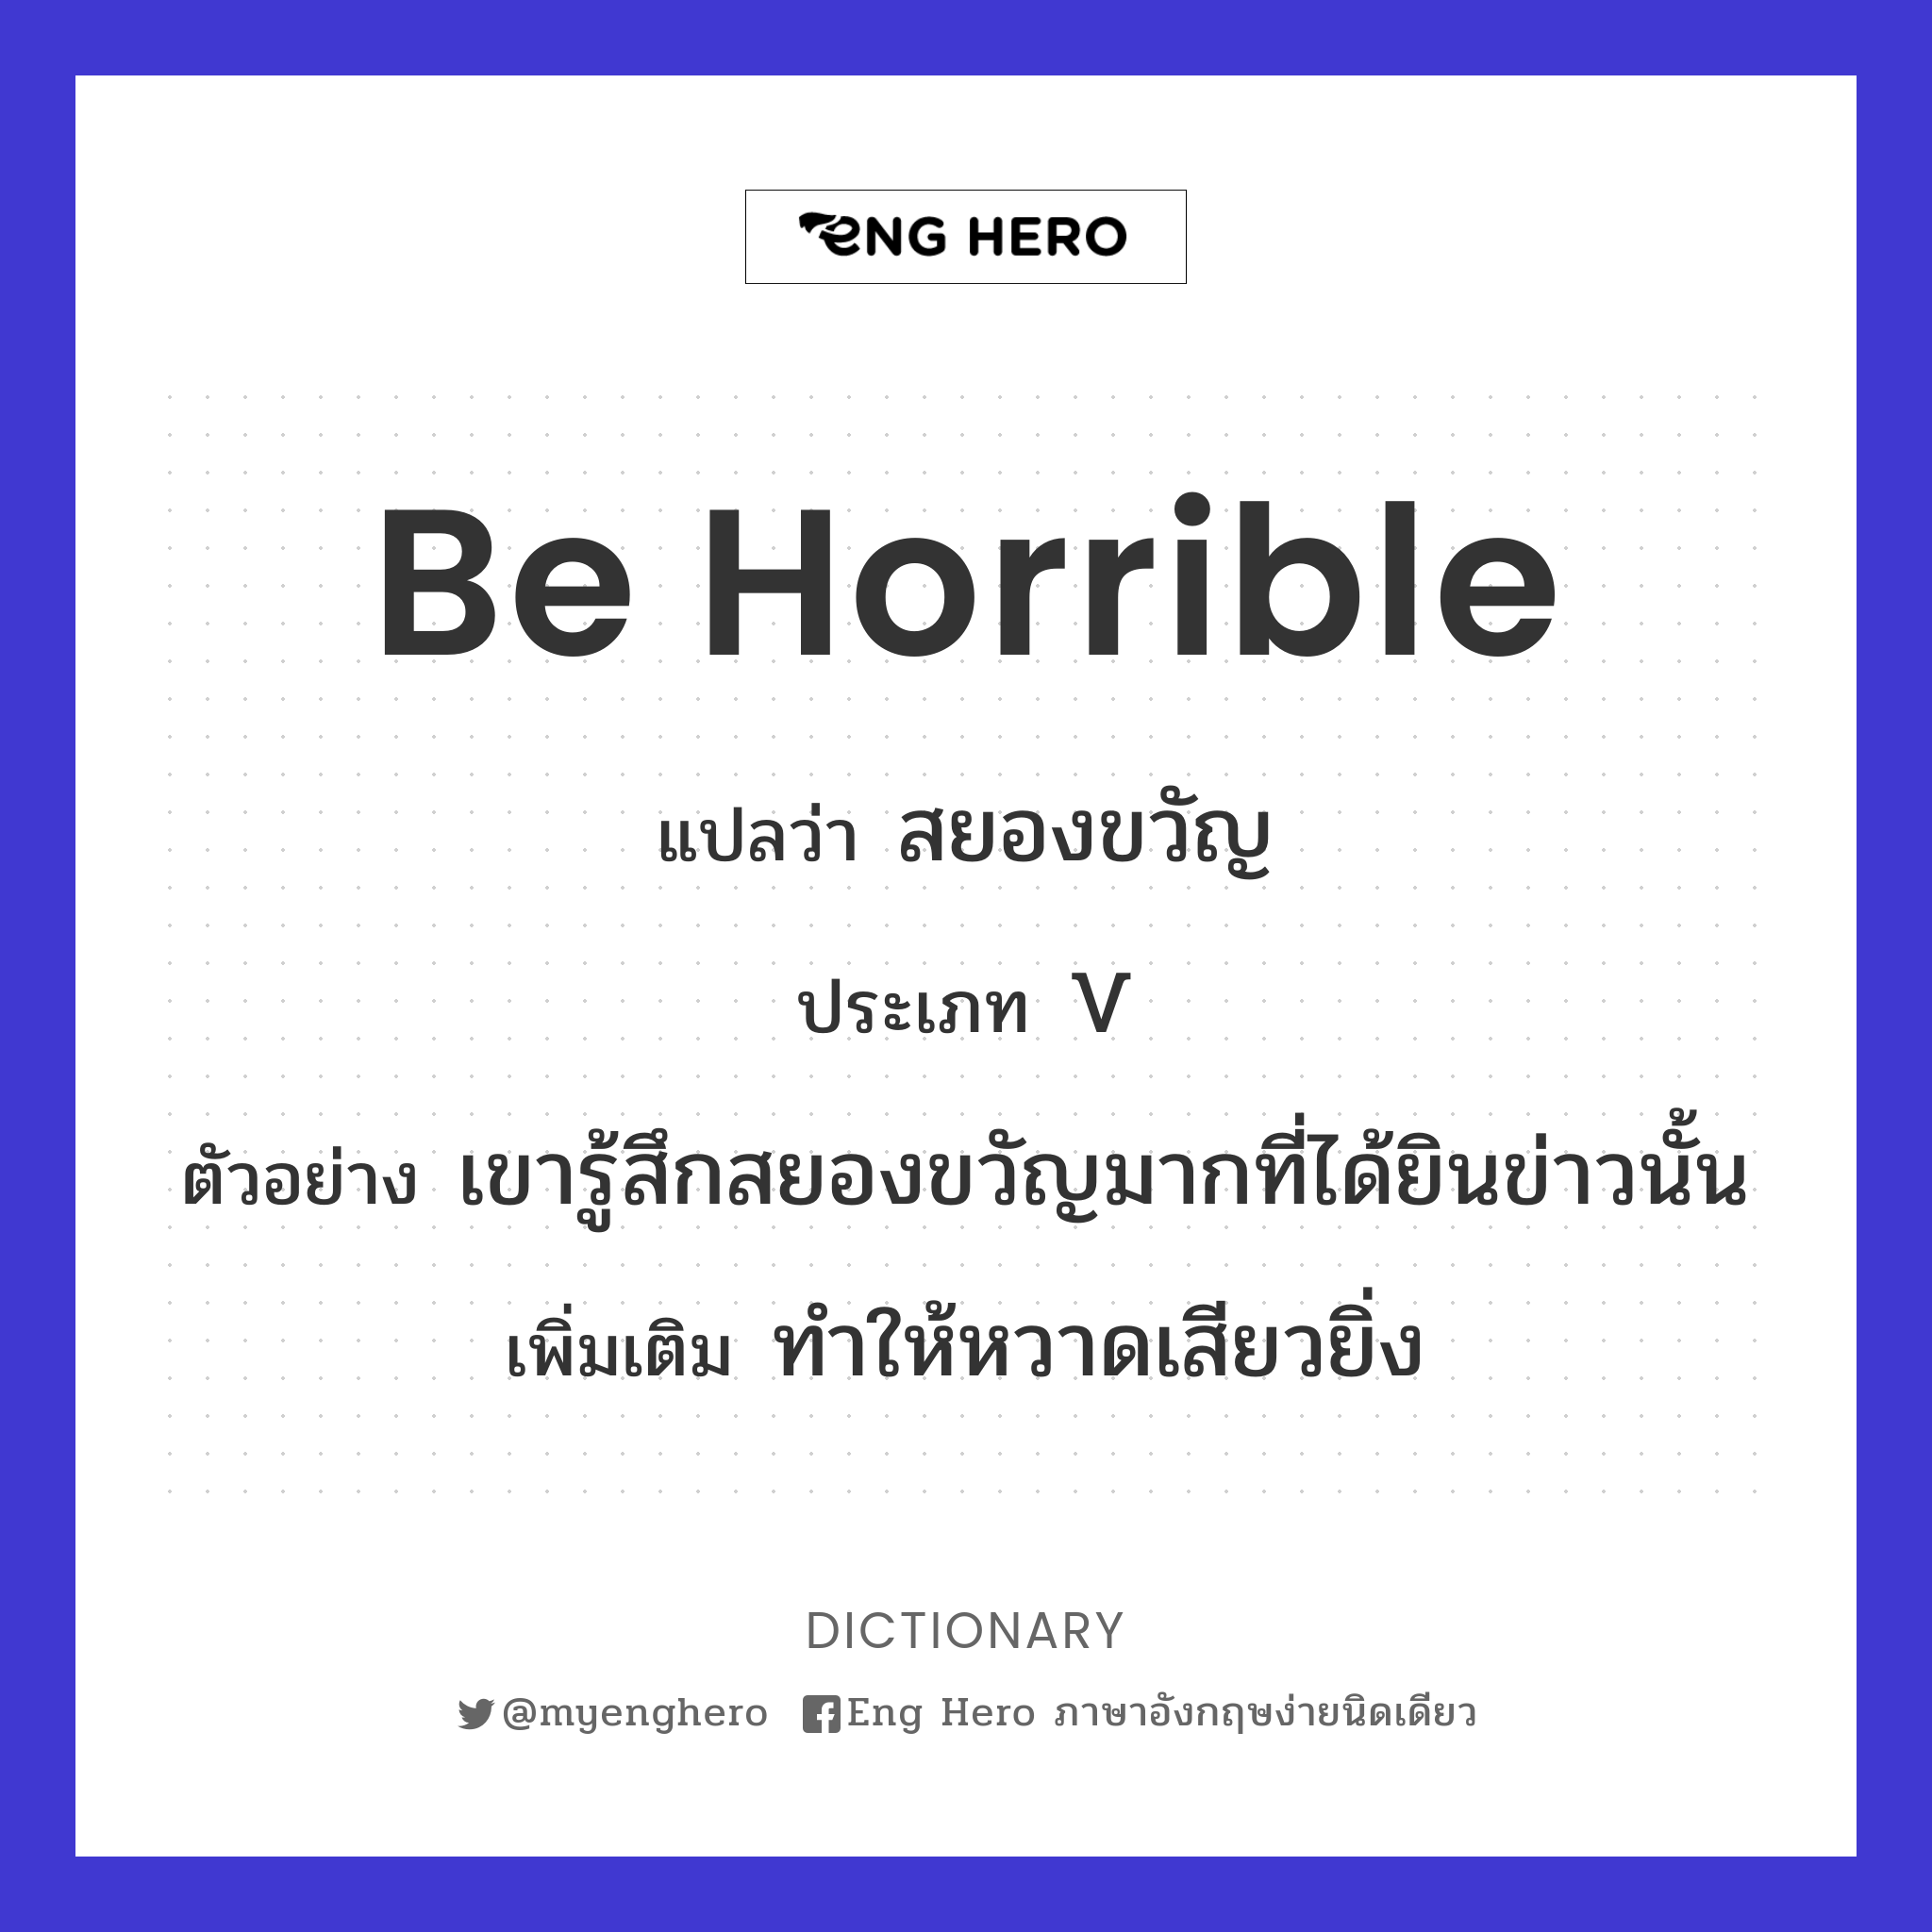 be horrible